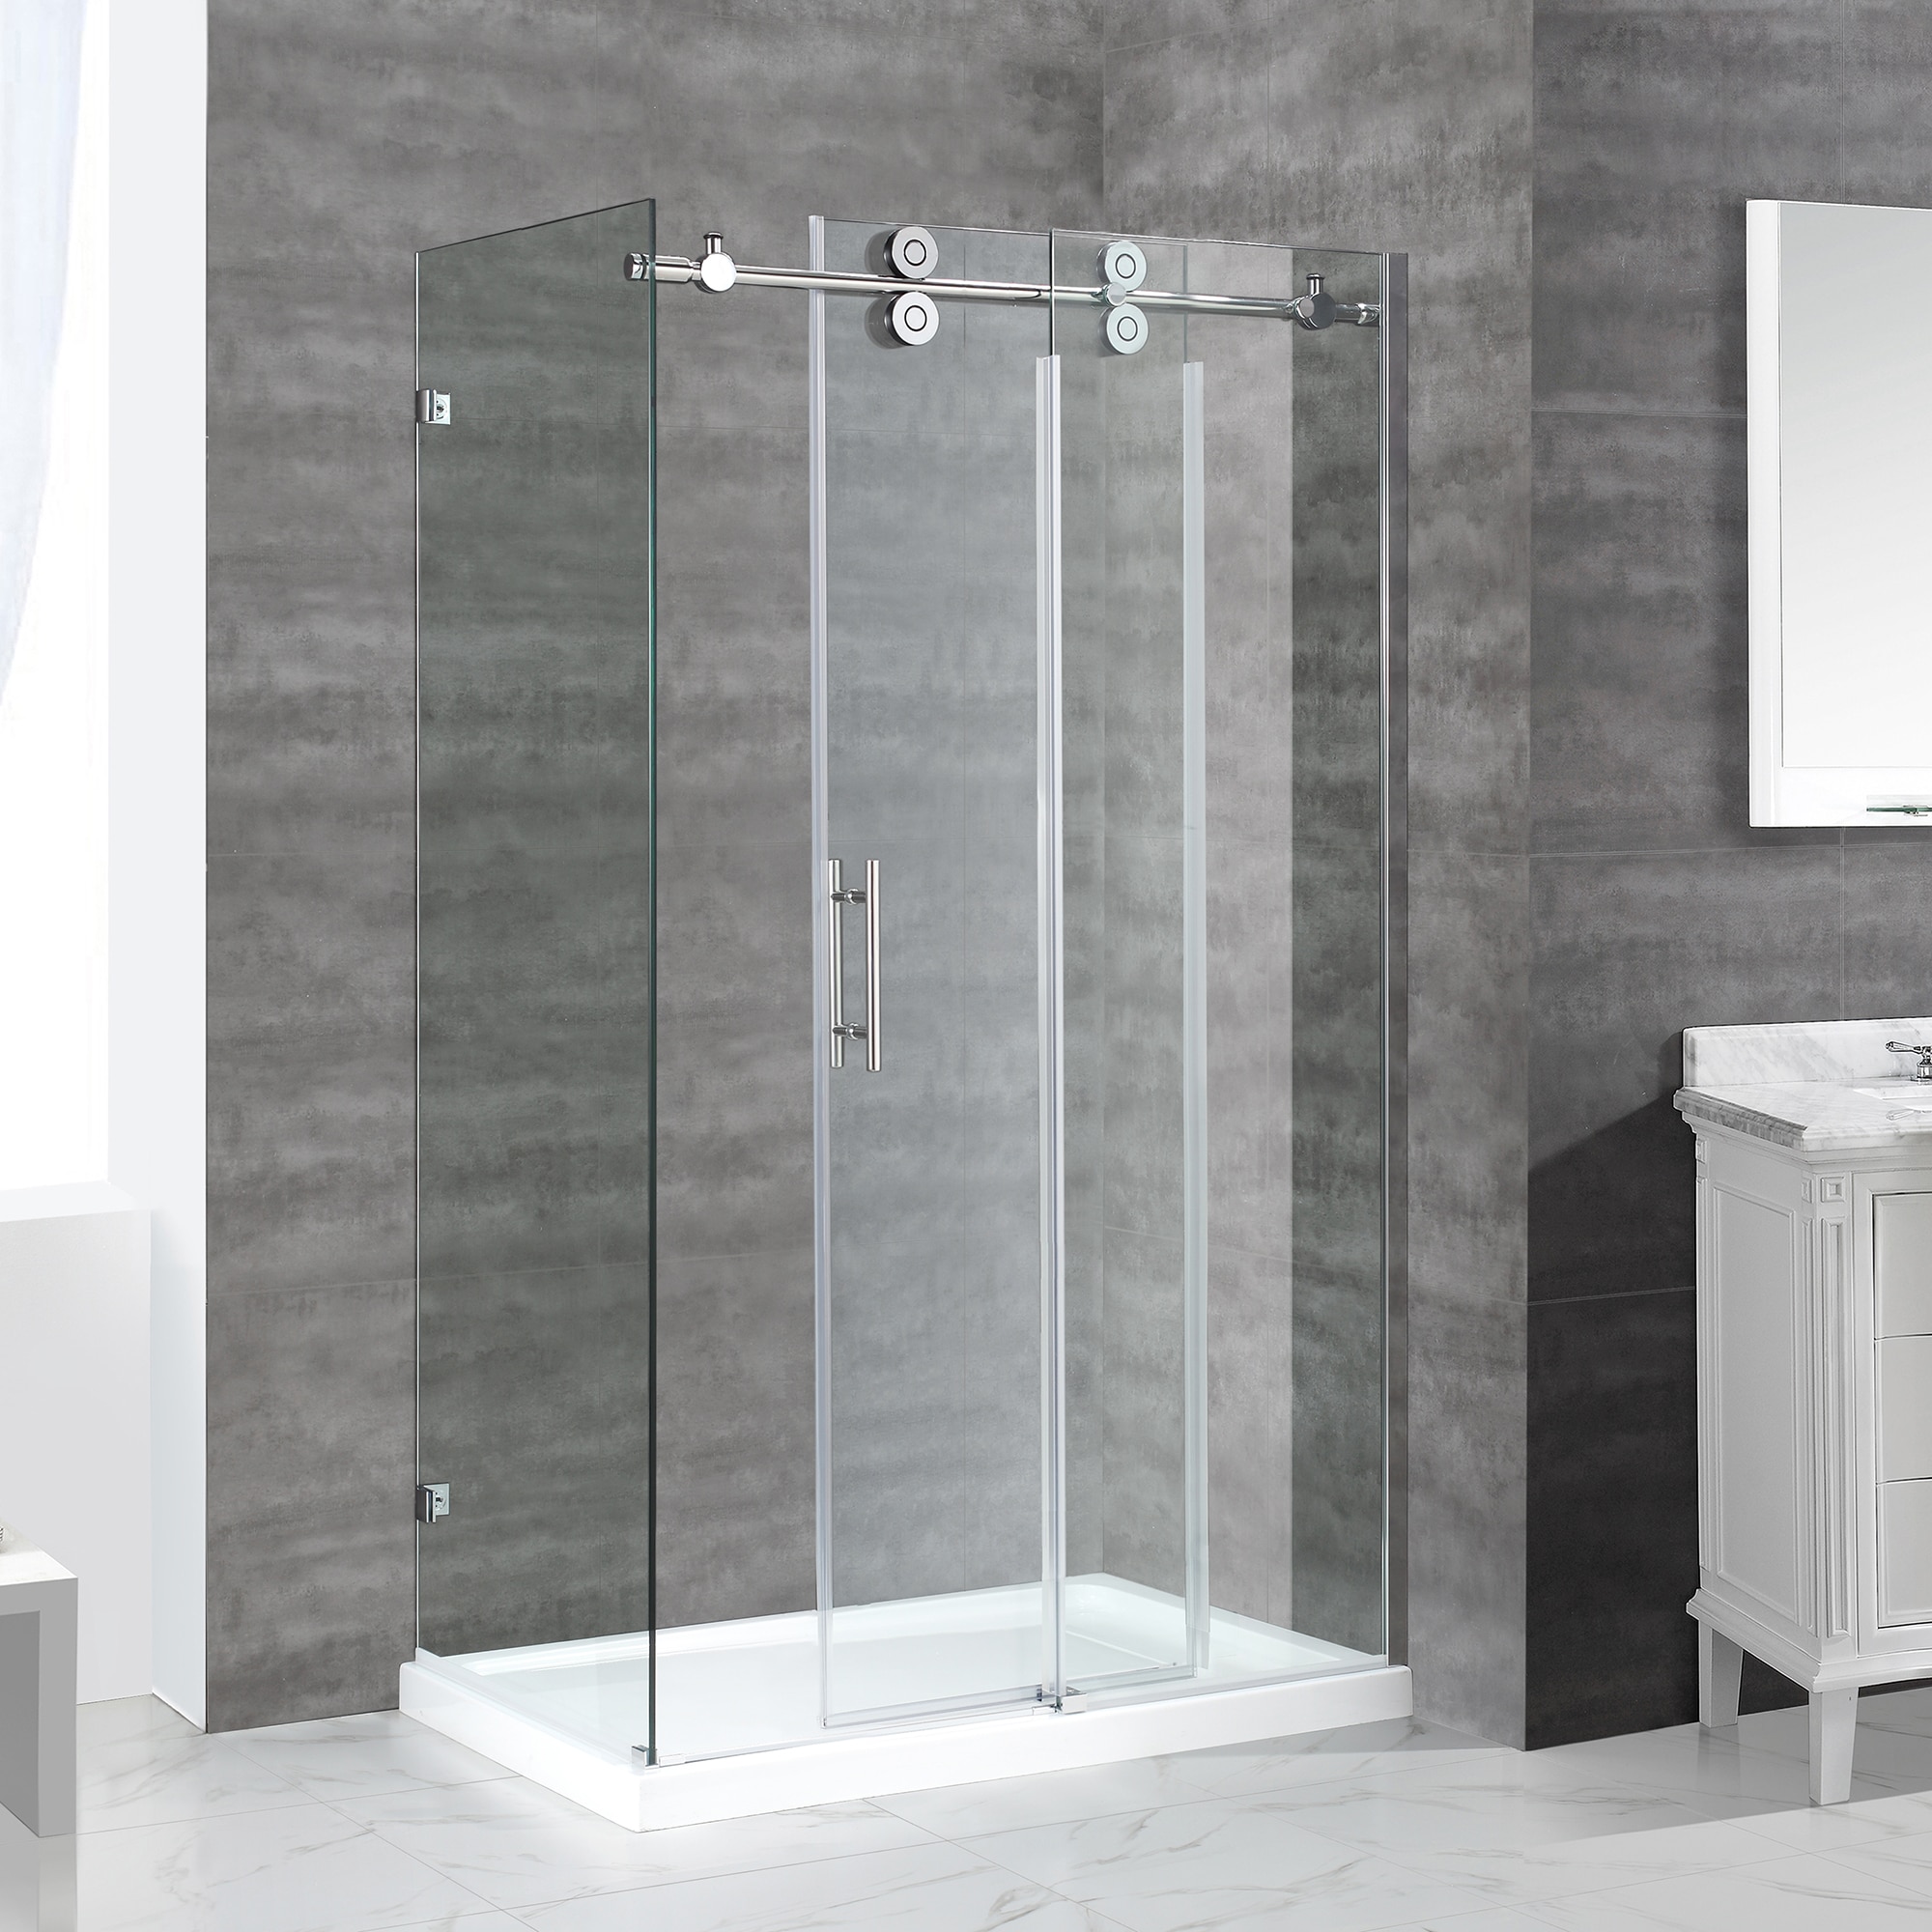 OVE Decors Sydney 3-Piece 32-in W x 48-in L x 81.5-in H Polished Chrome  Rectangular Corner Shower Kit (Side Hidden Drain) with Base and Door  Included in the Shower Stalls u0026 Enclosures